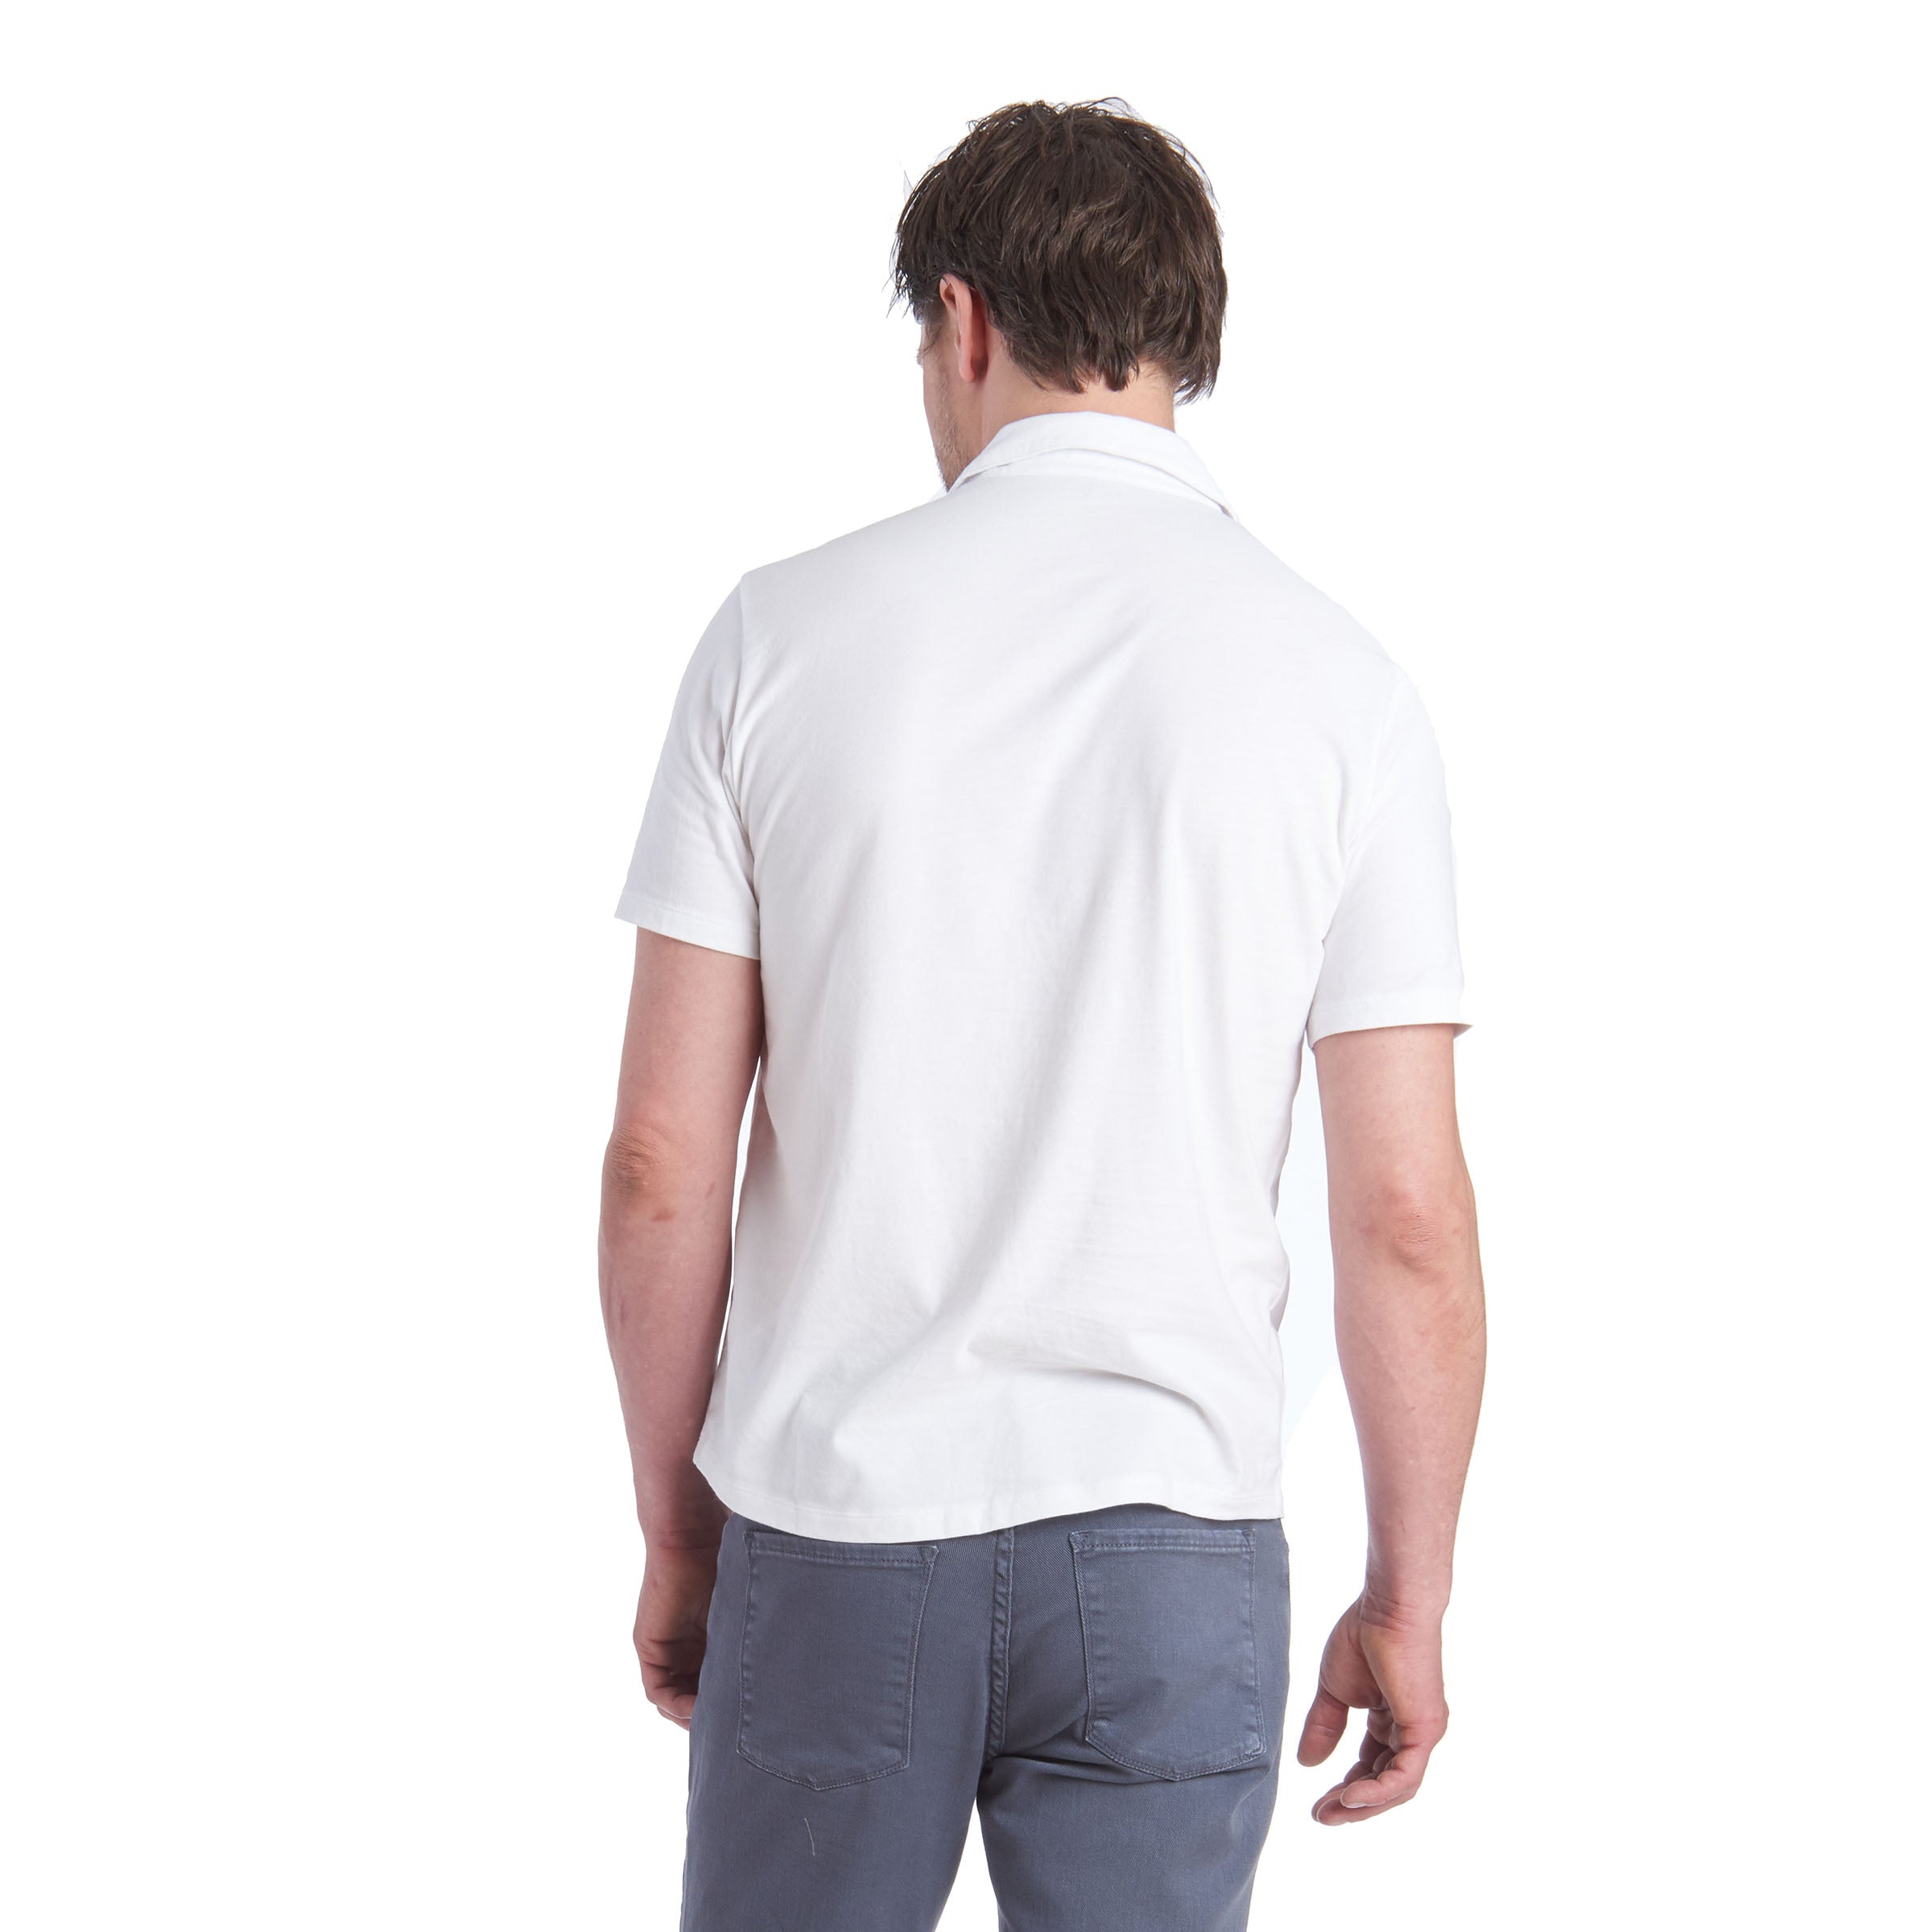 Men wearing Blanc Jersey Sueded Polo